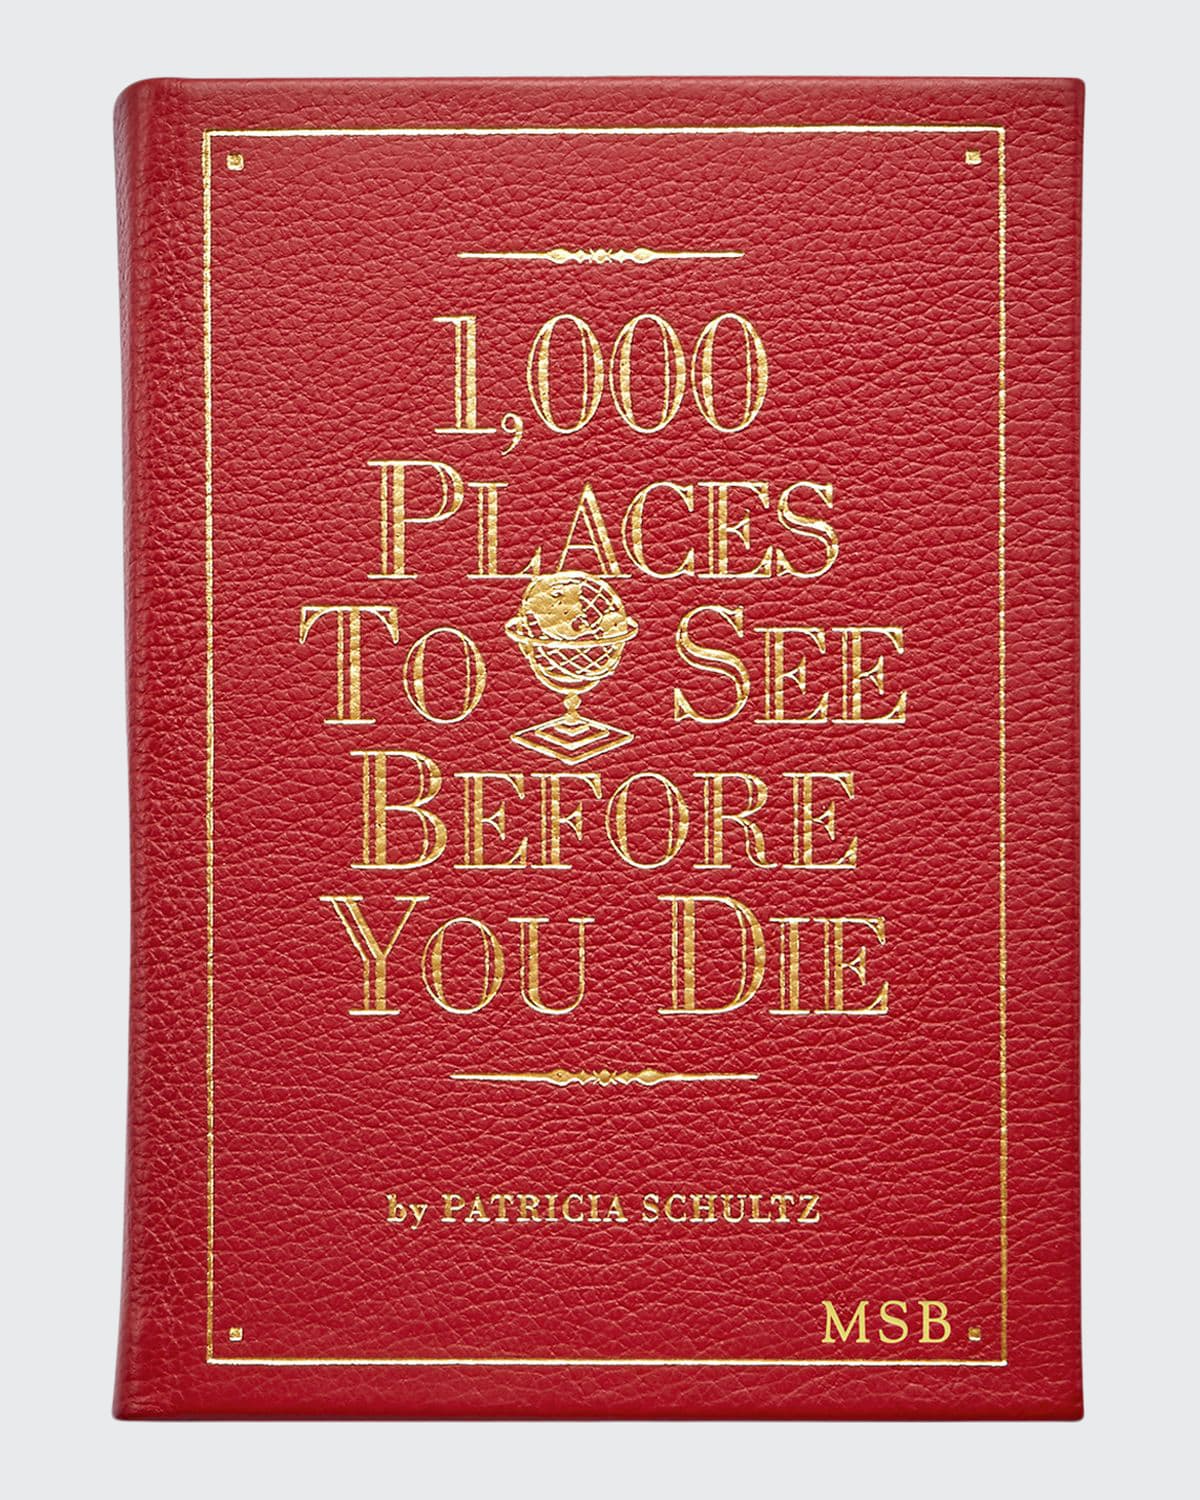 1,000 Places to See Before You Die by Patricia Schultz, Personalized